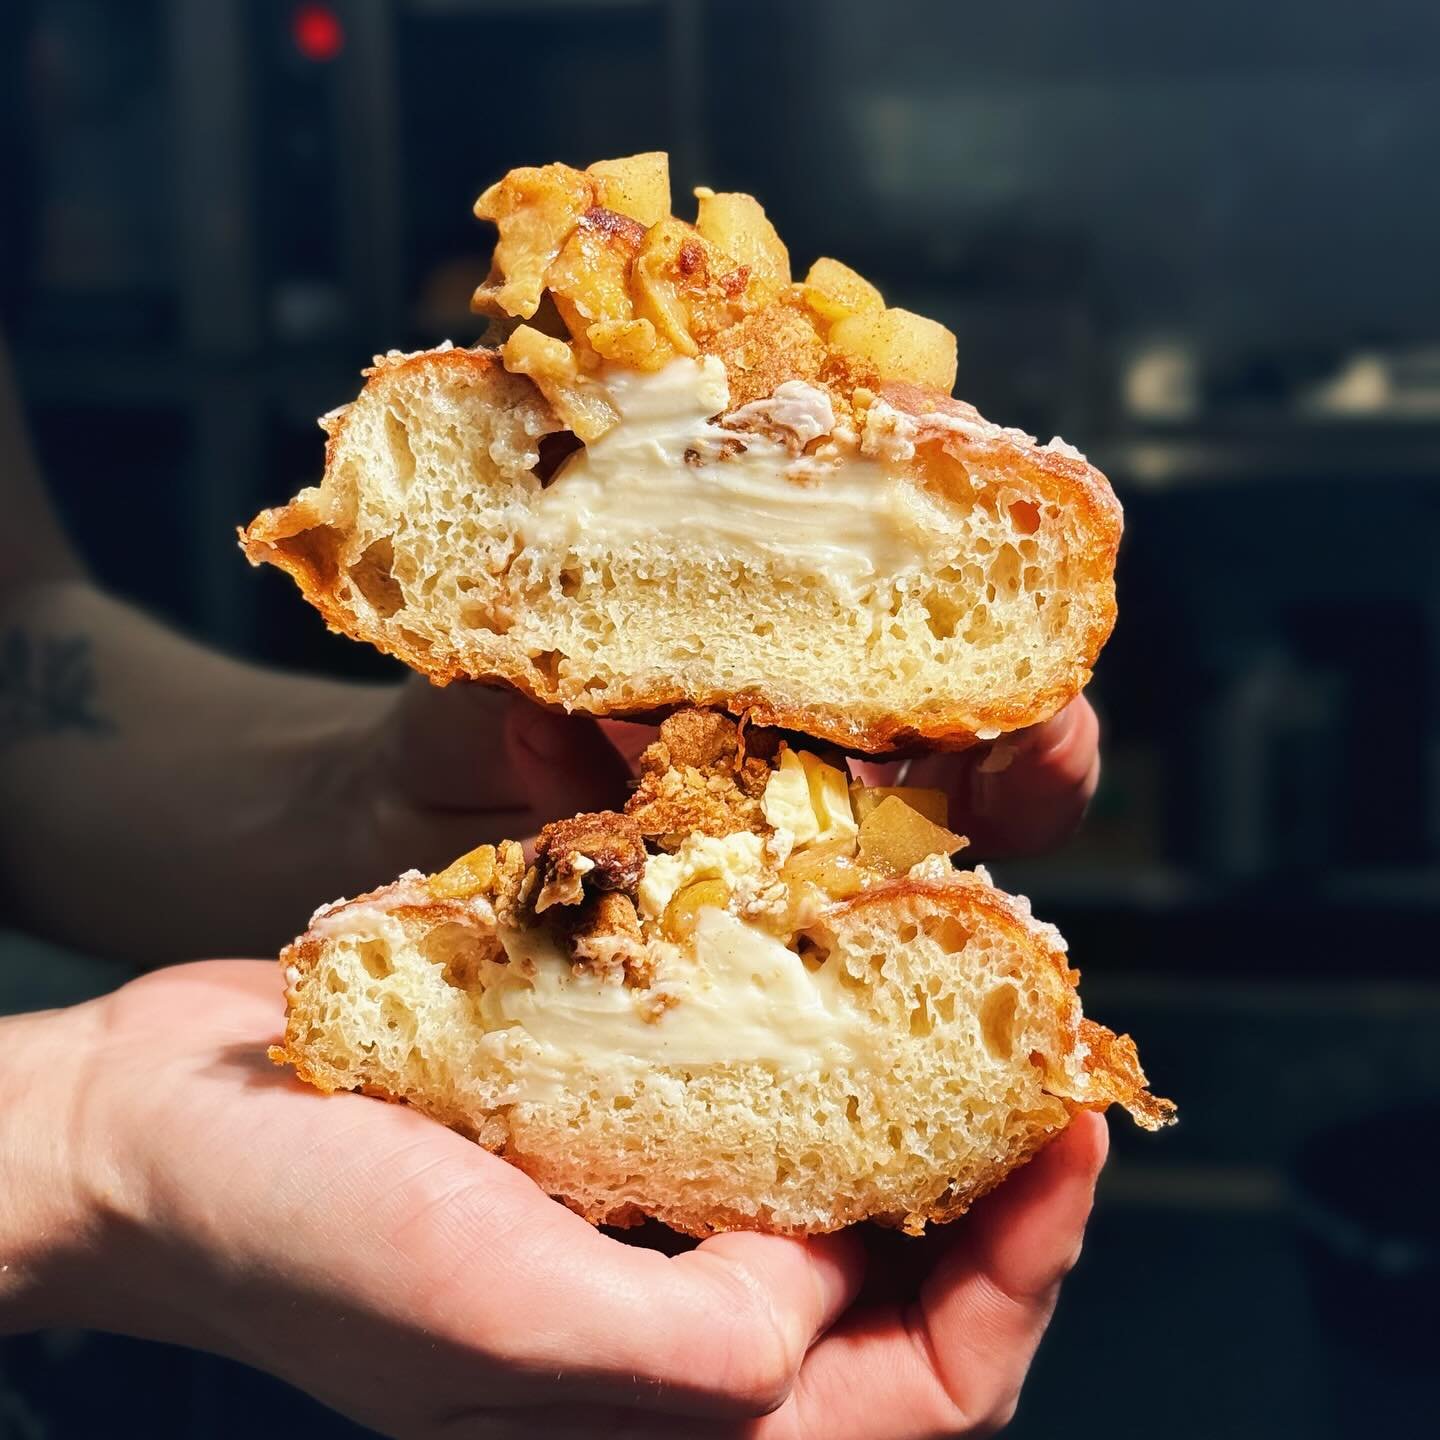 Feijoa Apple Crumble or Carrot Cake? 🍩
Pillowy brioche donut filled with feijoa and apple crumble pie filling, cream and a spiced oat crumble OR coated in vanilla glaze and the tenderest carrot cake crumb with toasted walnuts and buttercream. 
Feeli